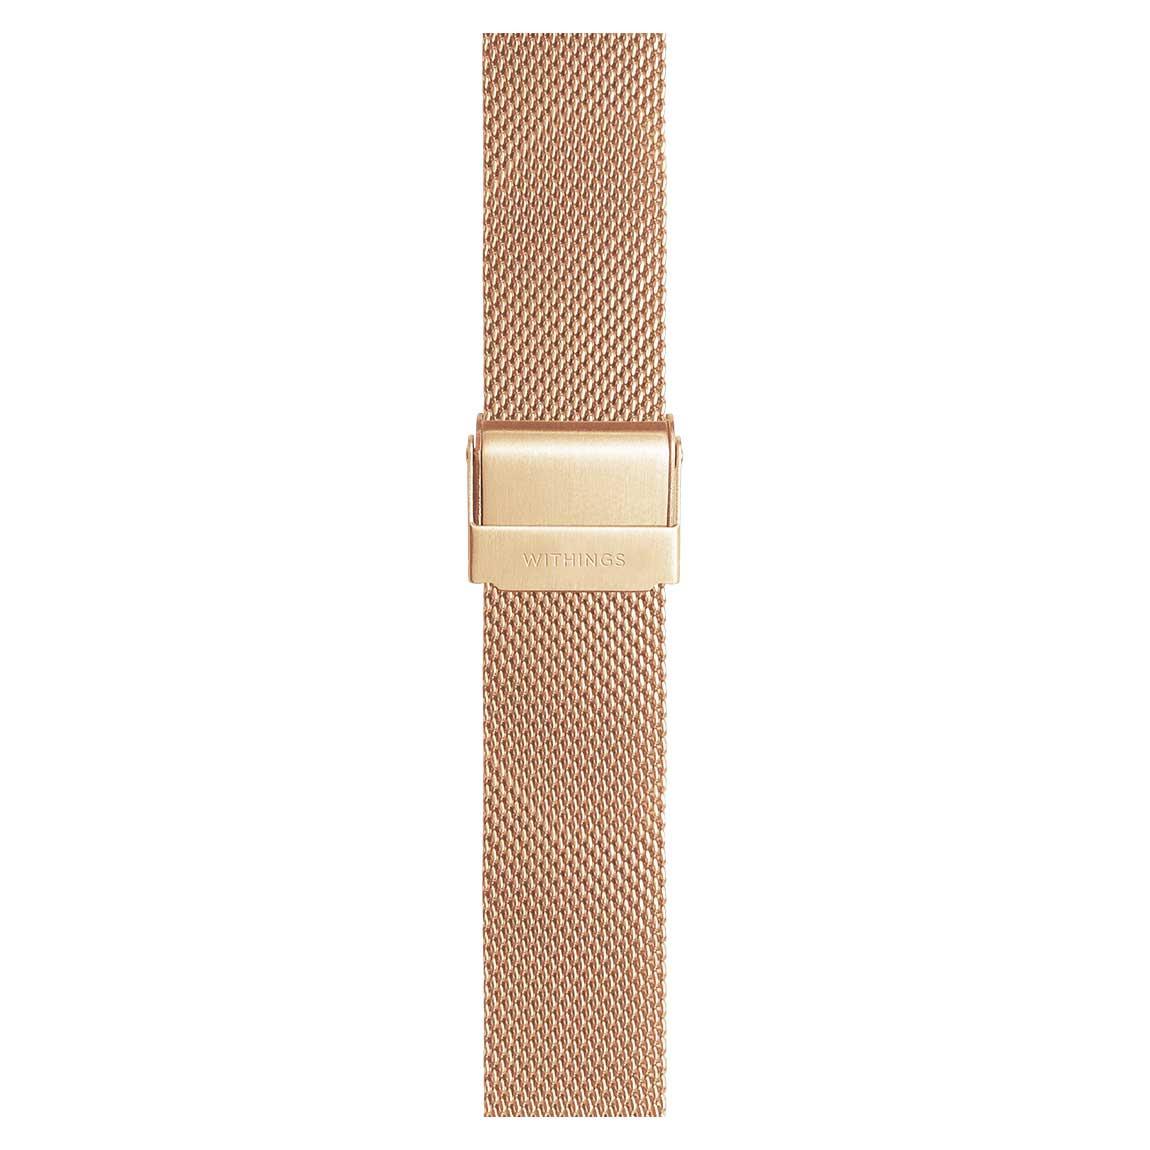 Withings Scanwatch - Milanese Armband Roségold_Verschluss